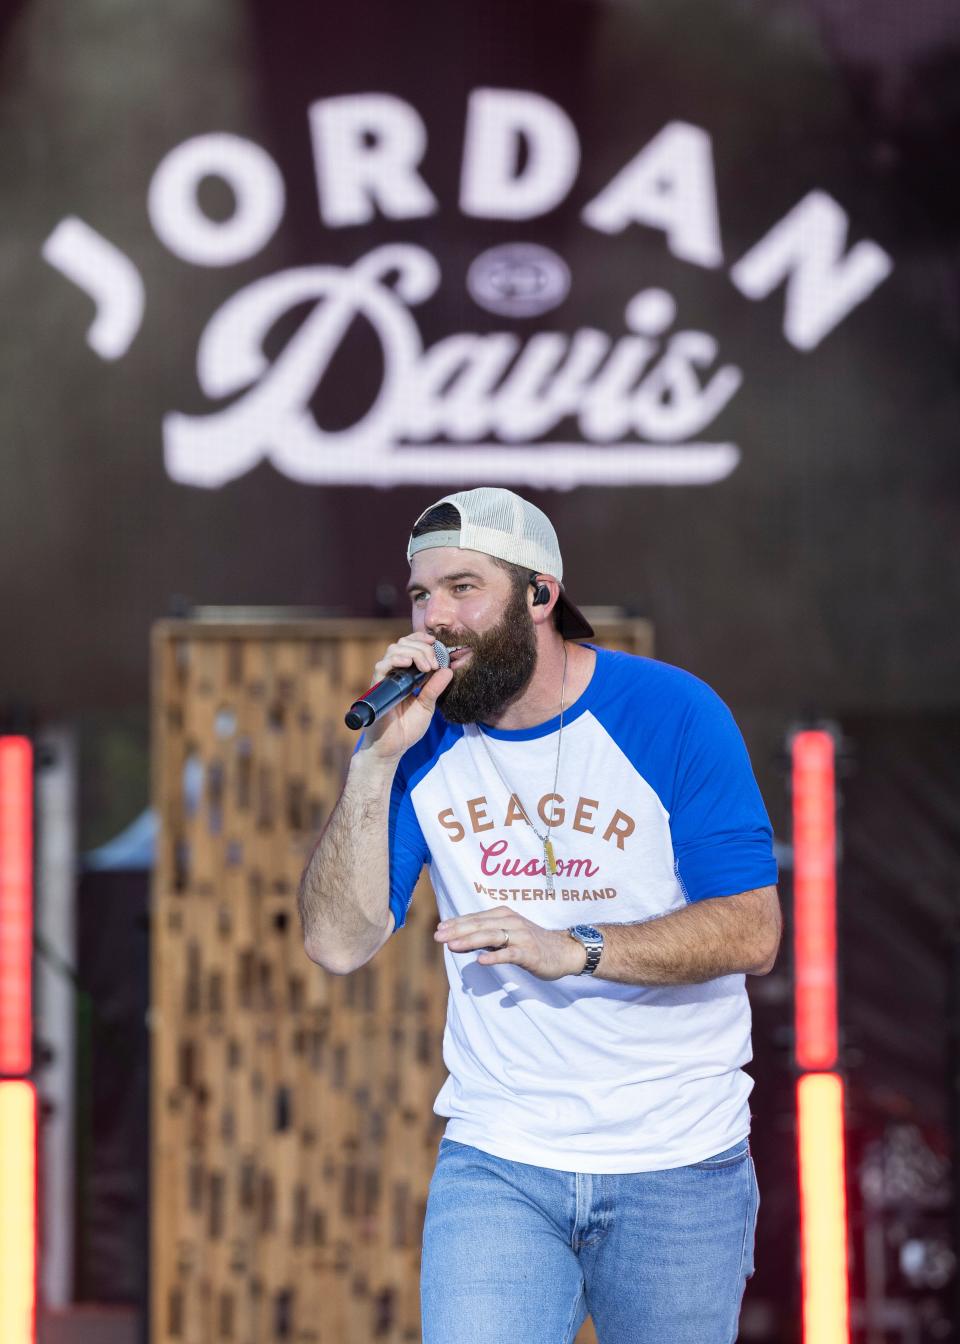 Jordan Davis, shown singing at the Gulf Coast Jam at Panama City Beach, will perform at 7 p.m. Saturday at Tom Benson Hall of Fame Stadium as part of the Fatherhood Festival at the Hall of Fame Village. For ticket information, visit the village's website. Children 12 and under are admitted free.